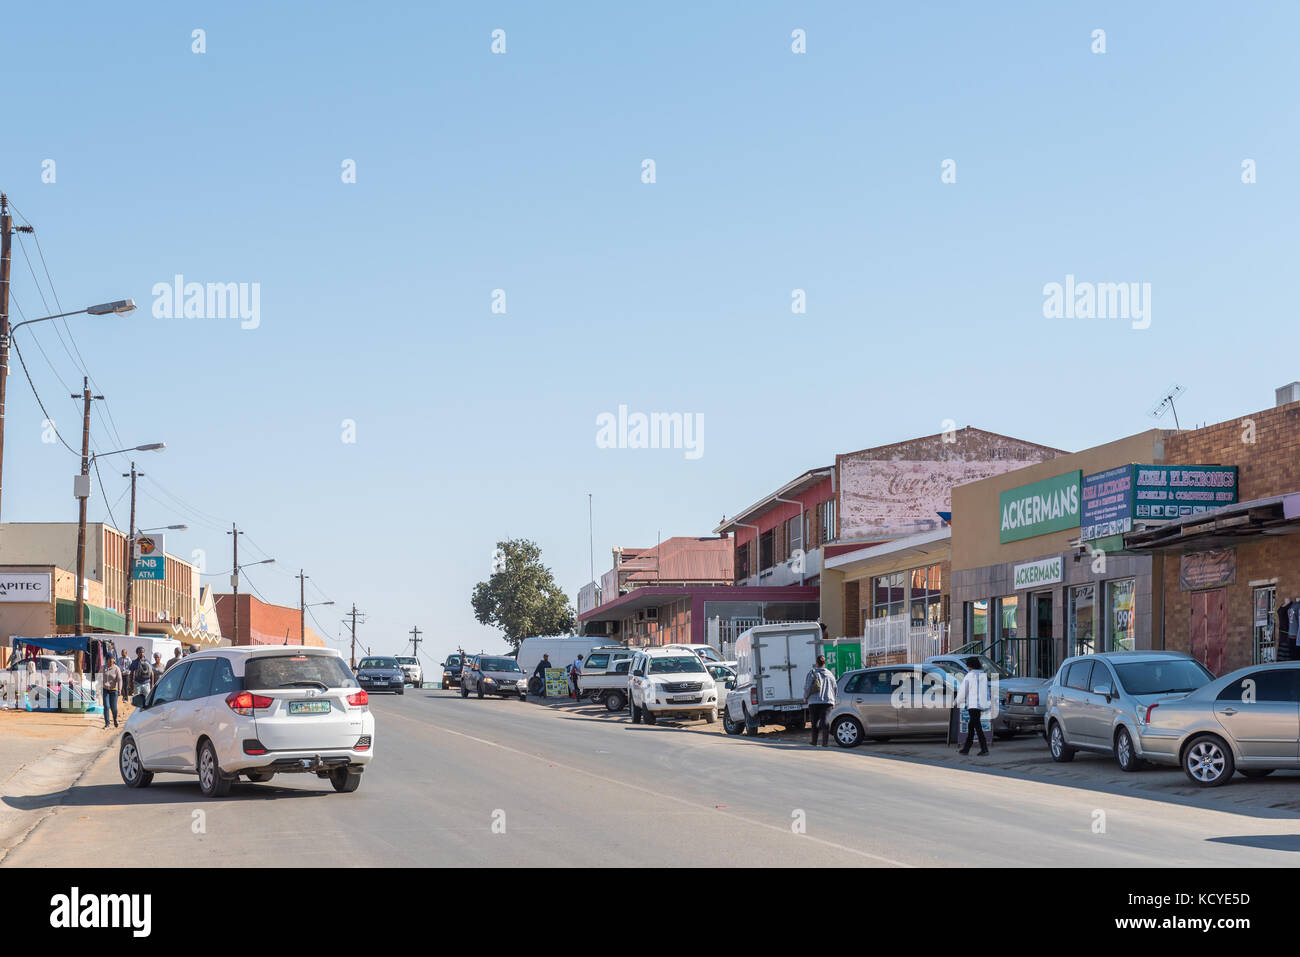 BARKLY WEST, SOUTH AFRICA - JULY 7, 2017: A street scene with businesses  and vehicles in Barkly West, a town in the Northern Cape Province of South  Af Stock Photo - Alamy